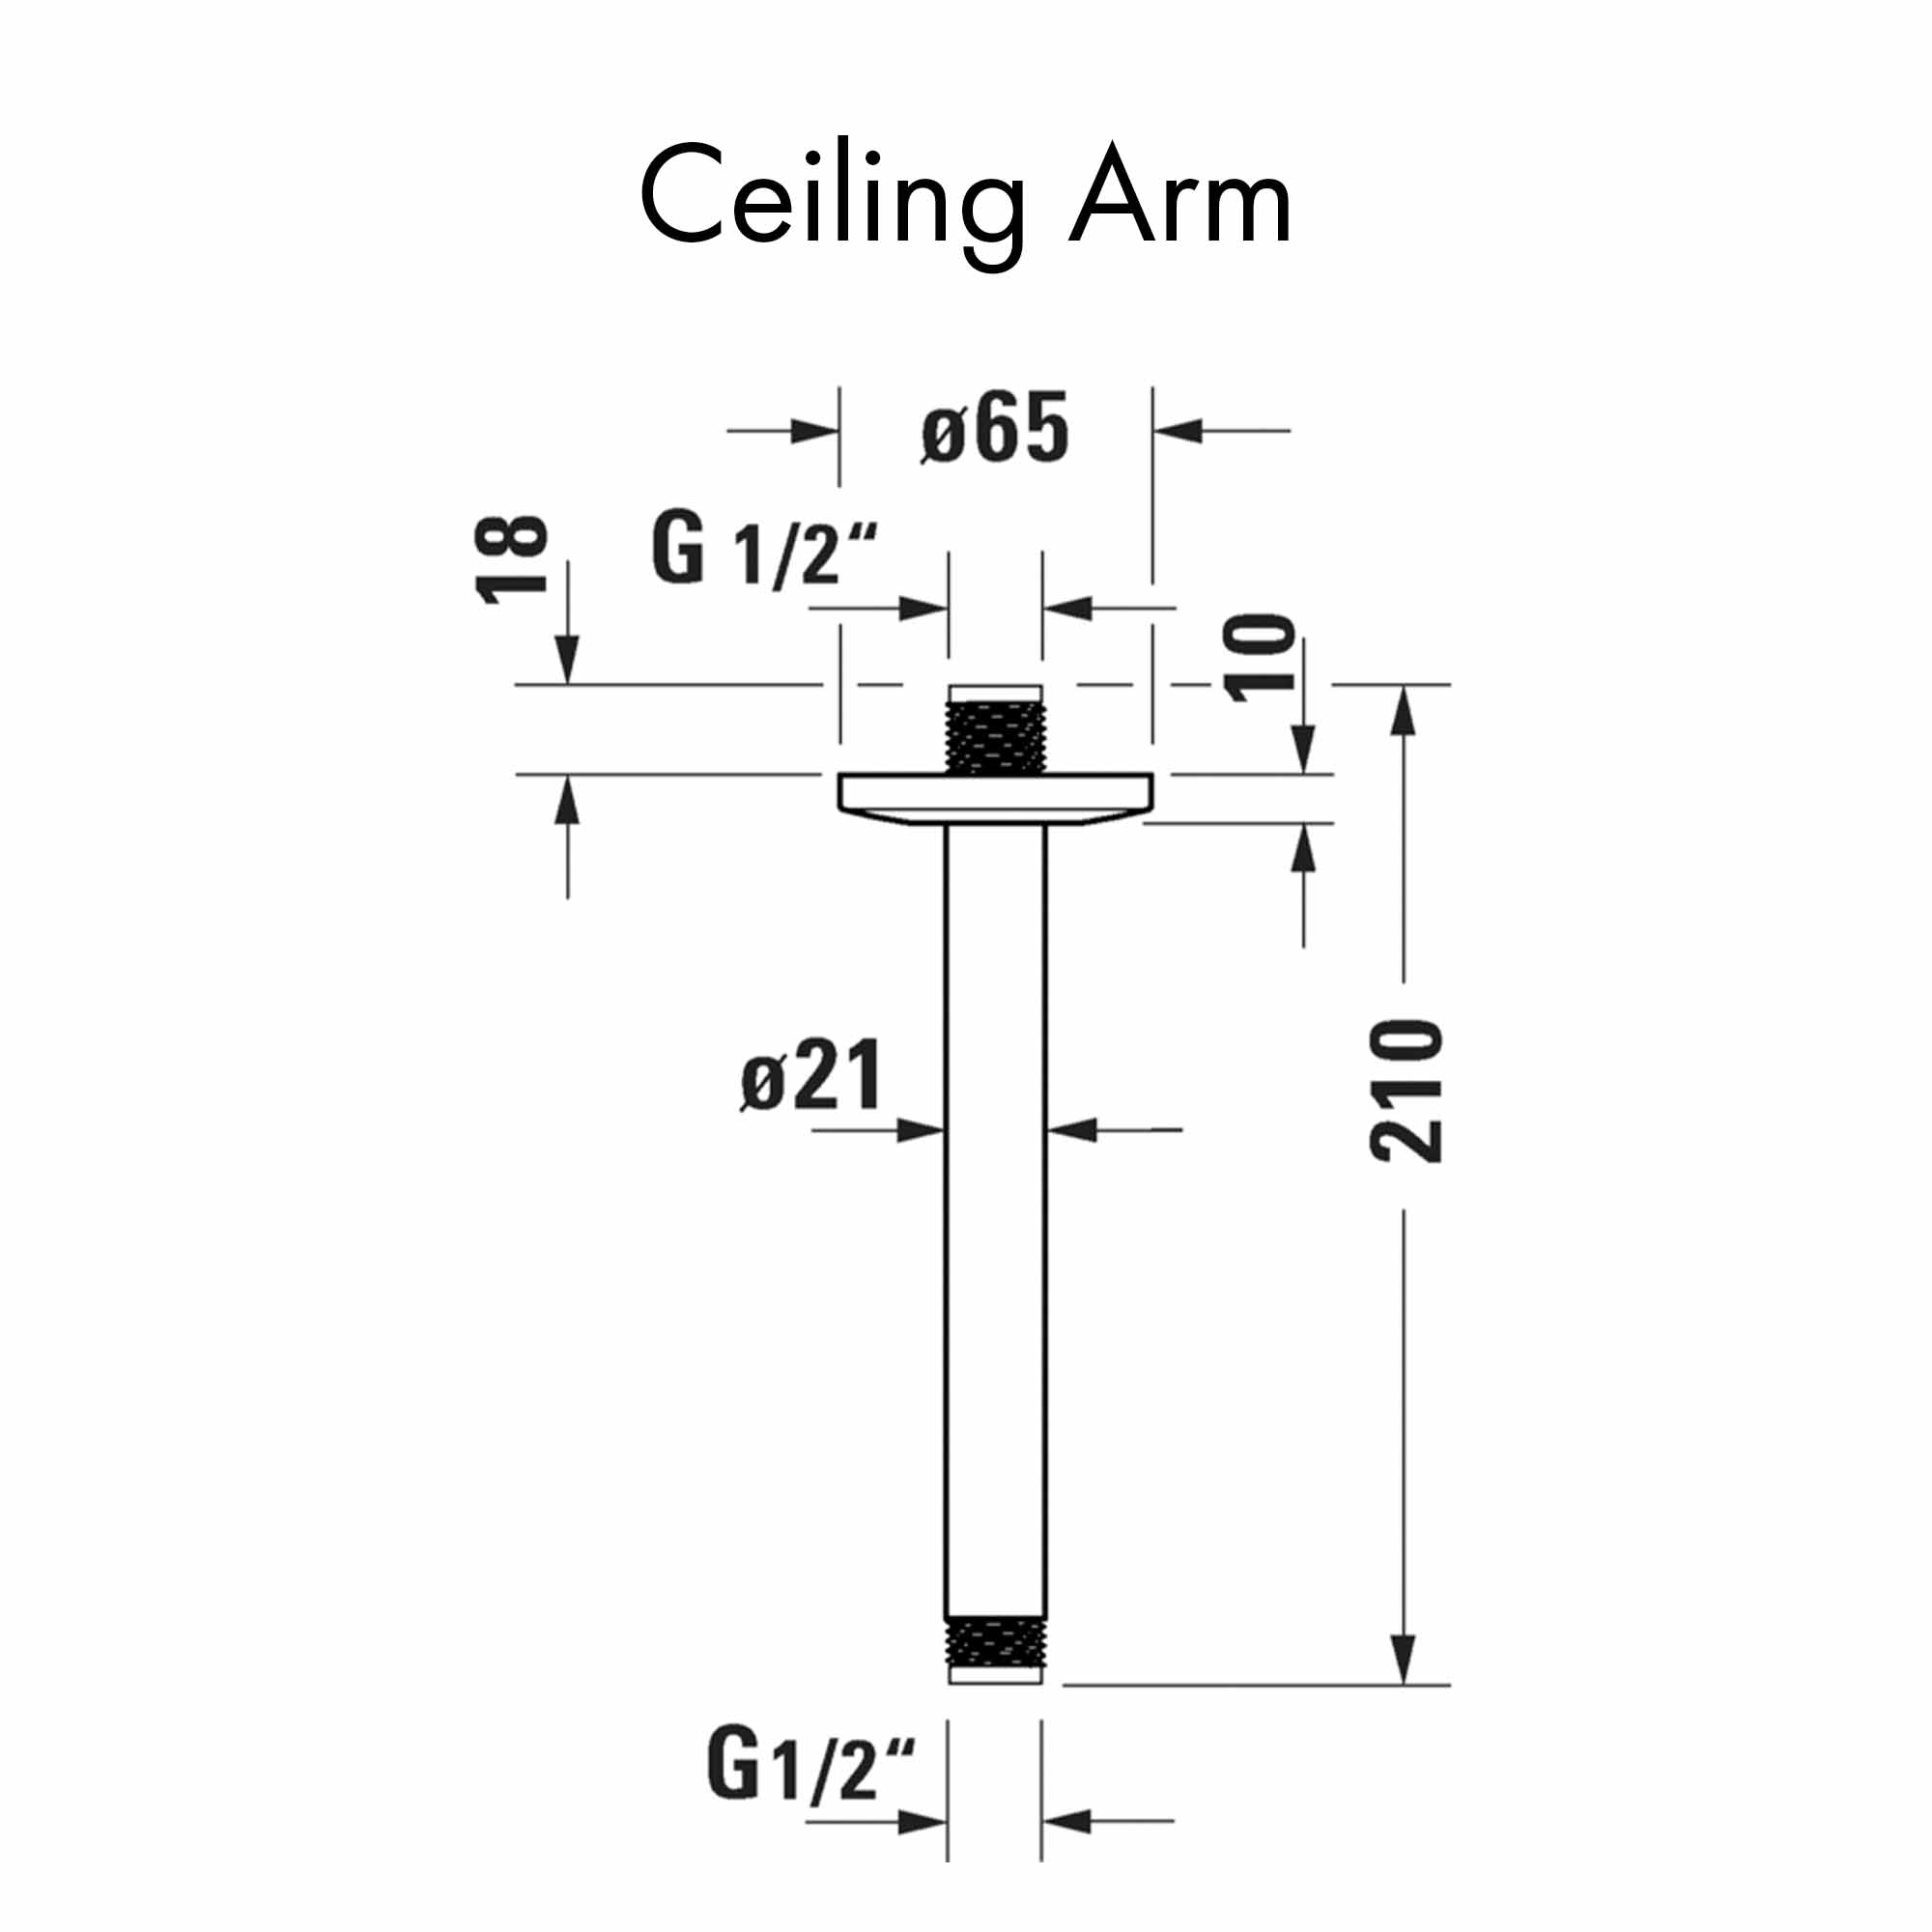 duravit ceiling mounted shower arm dimensions